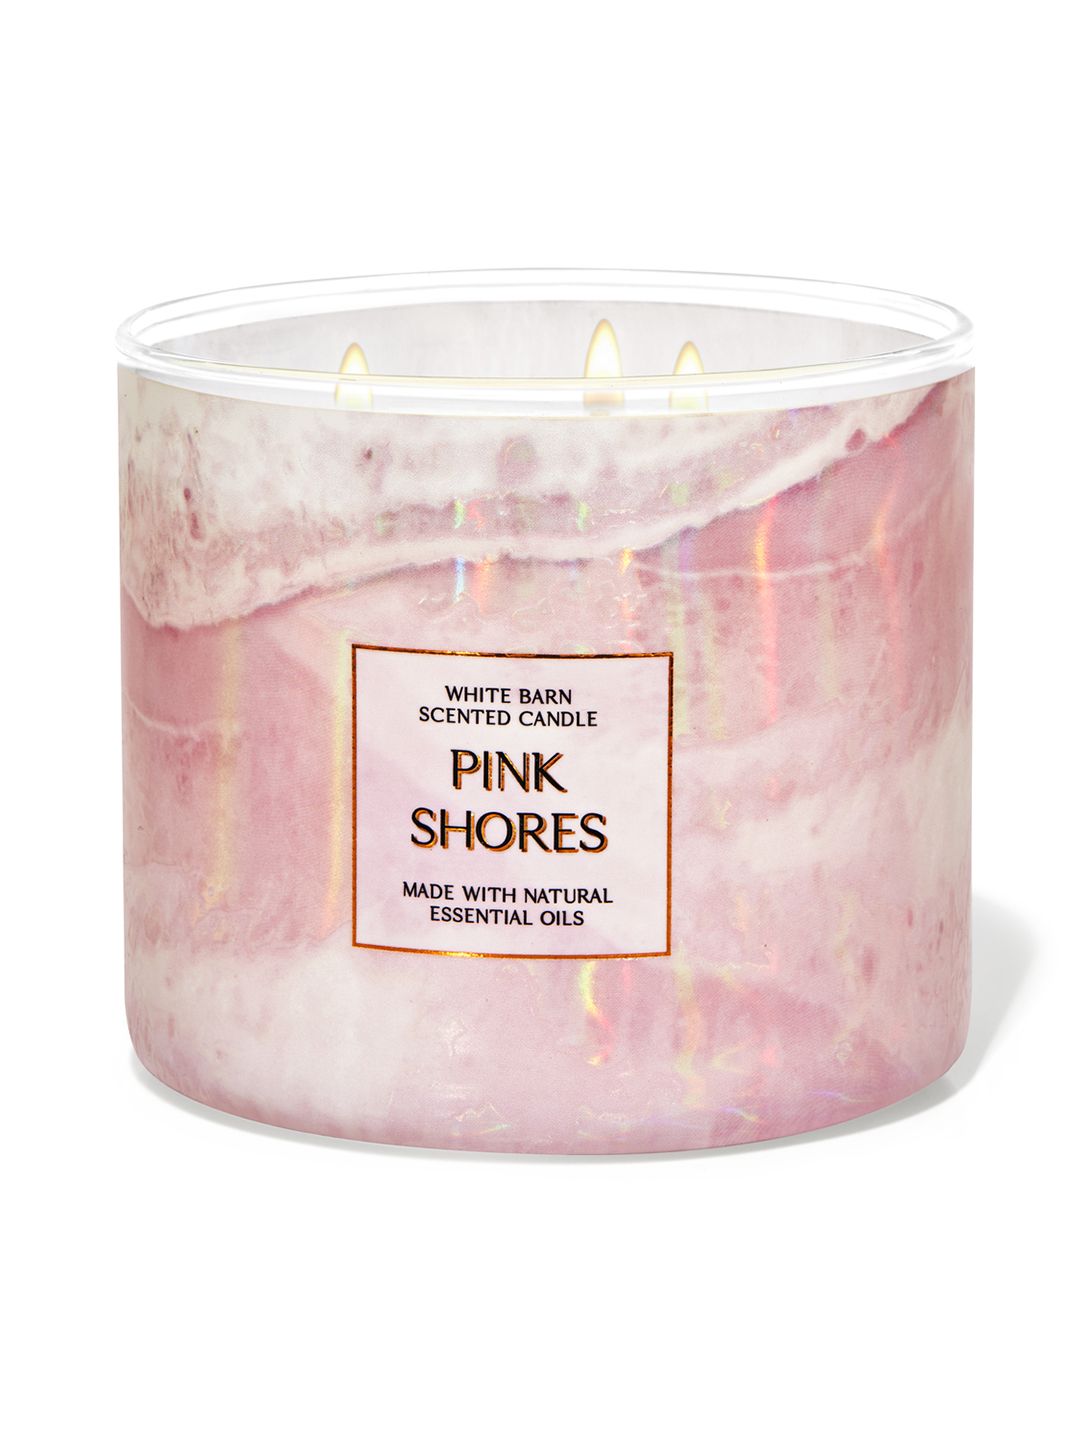 Bath & Body Works Pink Shores 3-Wick Candle - 411 g Price in India